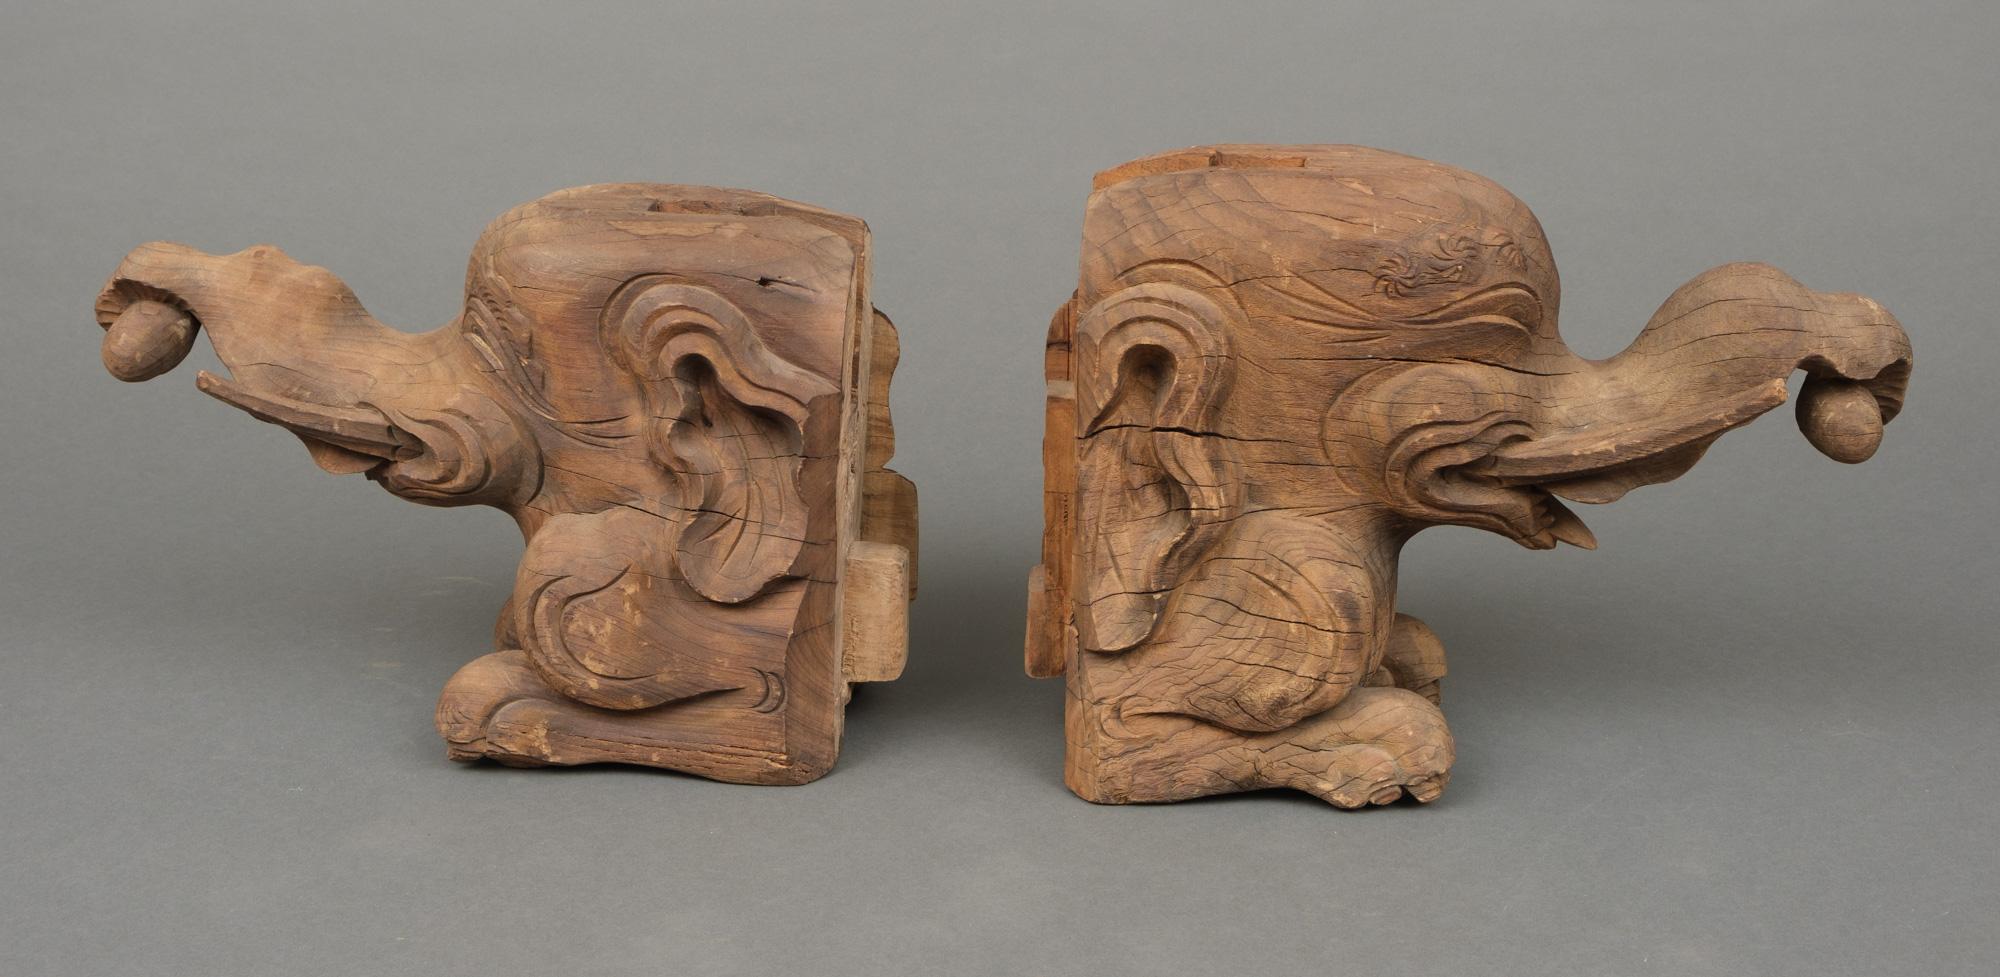 Pair of Japanese Carved Wooden Temple Ornaments 木鼻 'Kibana' Shaped like Baku 獏 For Sale 7